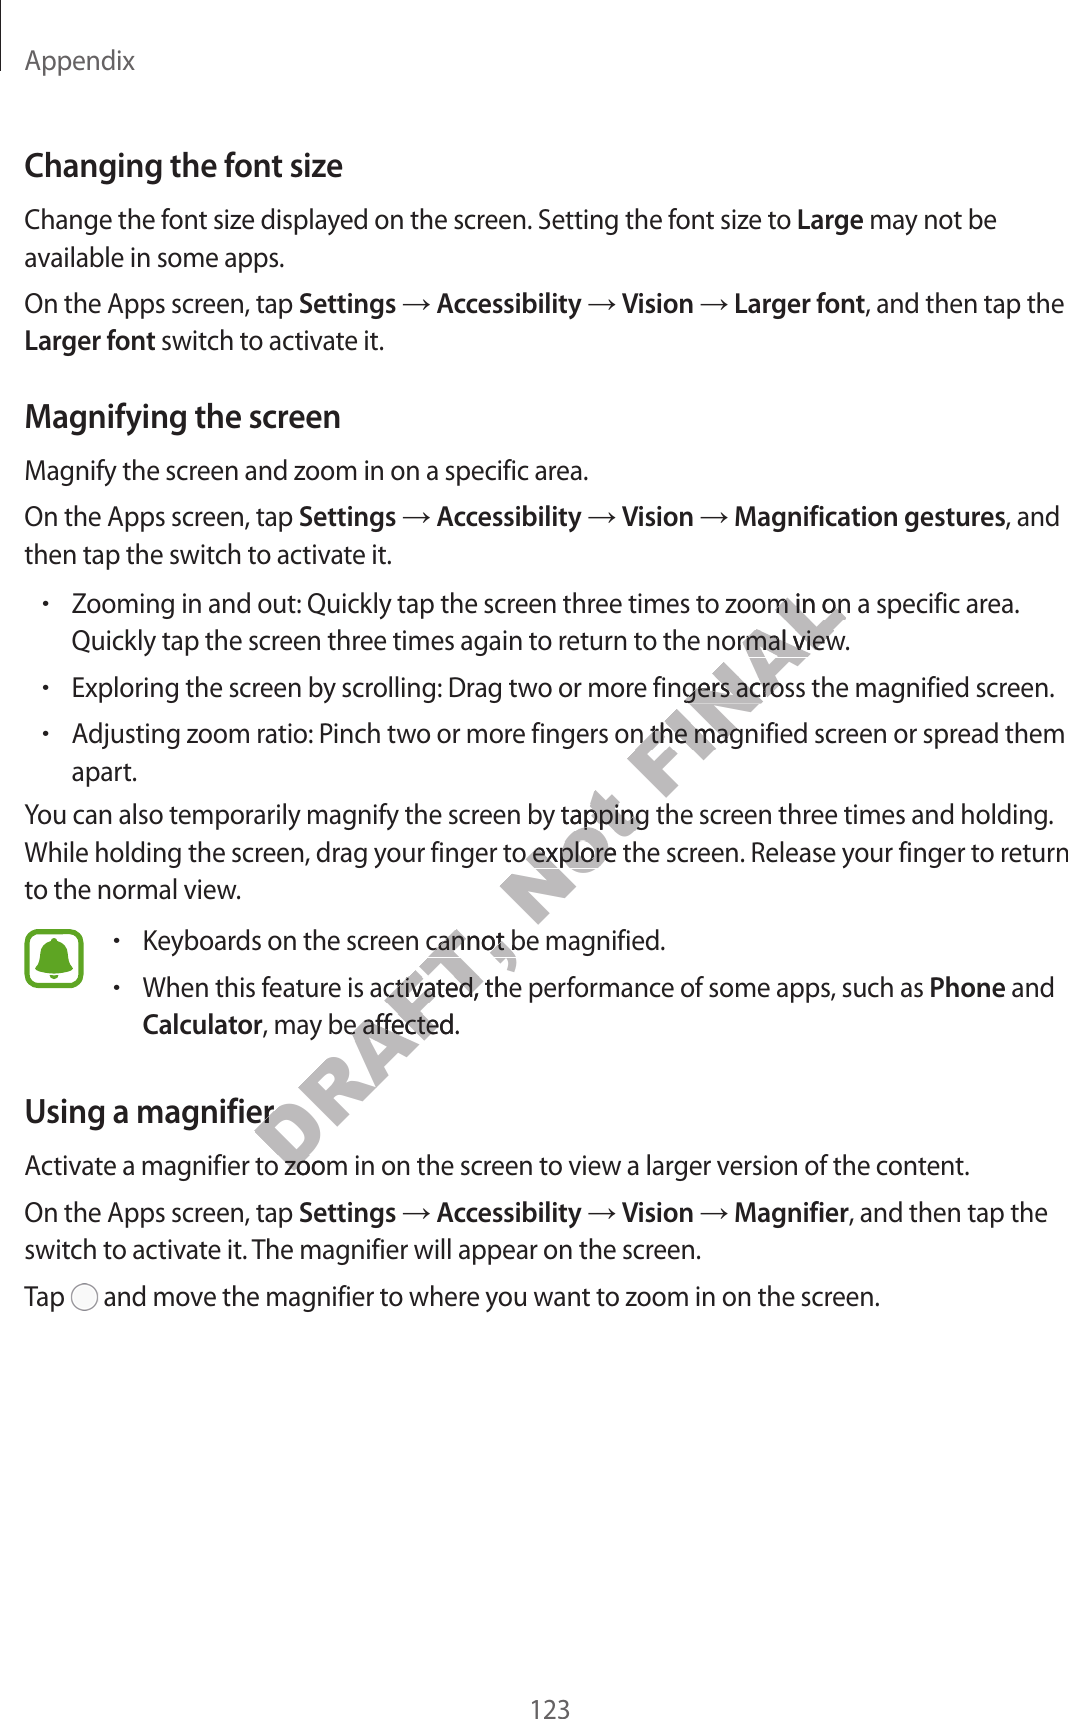 Appendix123Changing the font sizeChange the font size displayed on the screen. Setting the font size to Large may not be available in some apps.On the Apps screen, tap Settings  Accessibility  Vision  Larger font, and then tap the Larger font switch to activate it.Magnifying the screenMagnify the screen and zoom in on a specific area.On the Apps screen, tap Settings  Accessibility  Vision  Magnification gestures, and then tap the switch to activate it.•Zooming in and out: Quickly tap the screen three times to zoom in on a specific area.Quickly tap the screen three times again to return to the normal view.•Exploring the screen by scrolling: Drag two or more fingers across the magnified screen.•Adjusting zoom ratio: Pinch two or more fingers on the magnified screen or spread themapart.You can also temporarily magnify the screen by tapping the screen three times and holding. While holding the screen, drag your finger to explore the screen. Release your finger to return to the normal view.•Keyboards on the screen cannot be magnified.•When this feature is activated, the performance of some apps, such as Phone andCalculator, may be affected.Using a magnifierActivate a magnifier to zoom in on the screen to view a larger version of the content.On the Apps screen, tap Settings  Accessibility  Vision  Magnifier, and then tap the switch to activate it. The magnifier will appear on the screen.Tap   and move the magnifier to where you want to zoom in on the screen.DRAFT, een cannot be mageen cannot be mage is activated, the pere is activated, the perDRAFT, y be affected.y be affectednifiernifiernifier to zoom in on the scrnifier to zoom in on the scrNot een by tapping the scry tapping the scrour finger to explore the scrour finger to explore the scrFINALoom in on a specific aroom in on a specific aro the normal viewo the normal viewe fingers across the mage fingers across the mage fingers on the magnified scre fingers on the mag